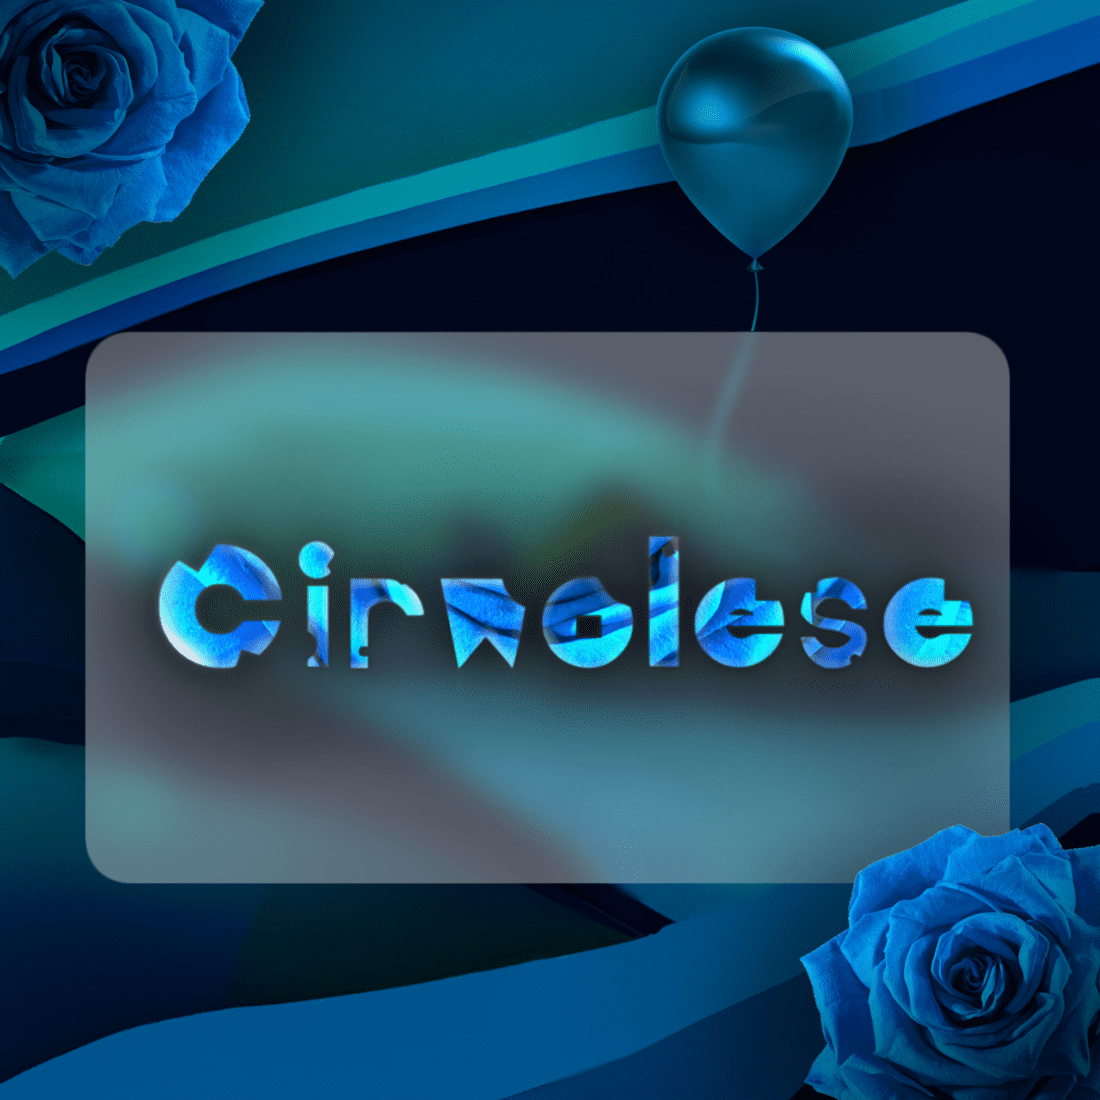 Cirwolese font cover image.